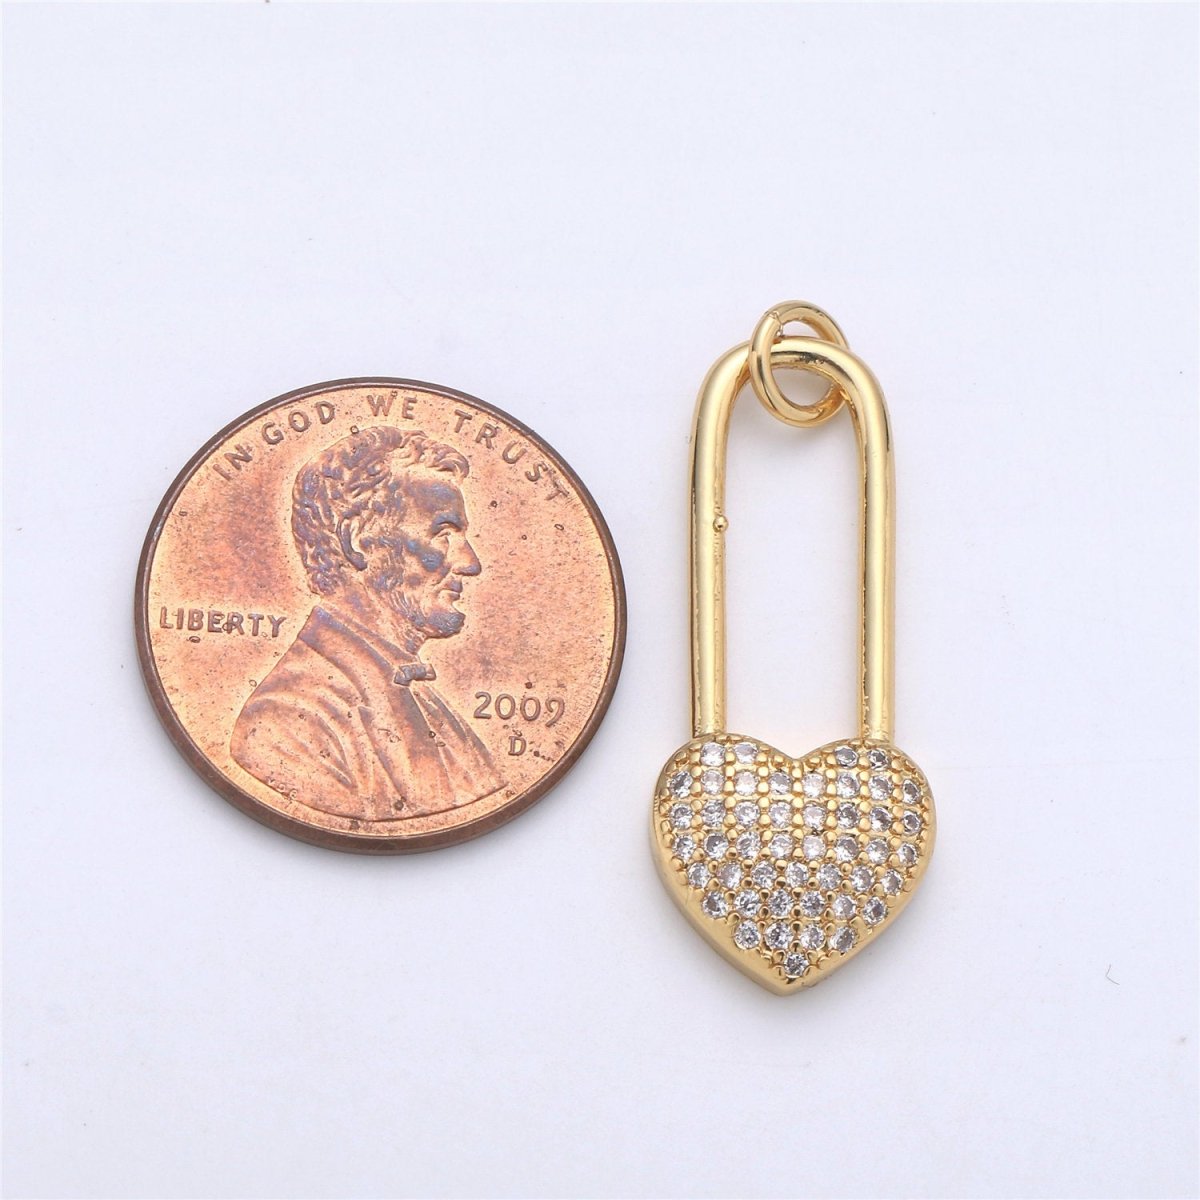 27X10mm 14k Gold Filled Micro Pave lock Pendant , Cubic Heart Charms , Gold PadLock Charm Necklace Earring Component Supply C-923 - DLUXCA